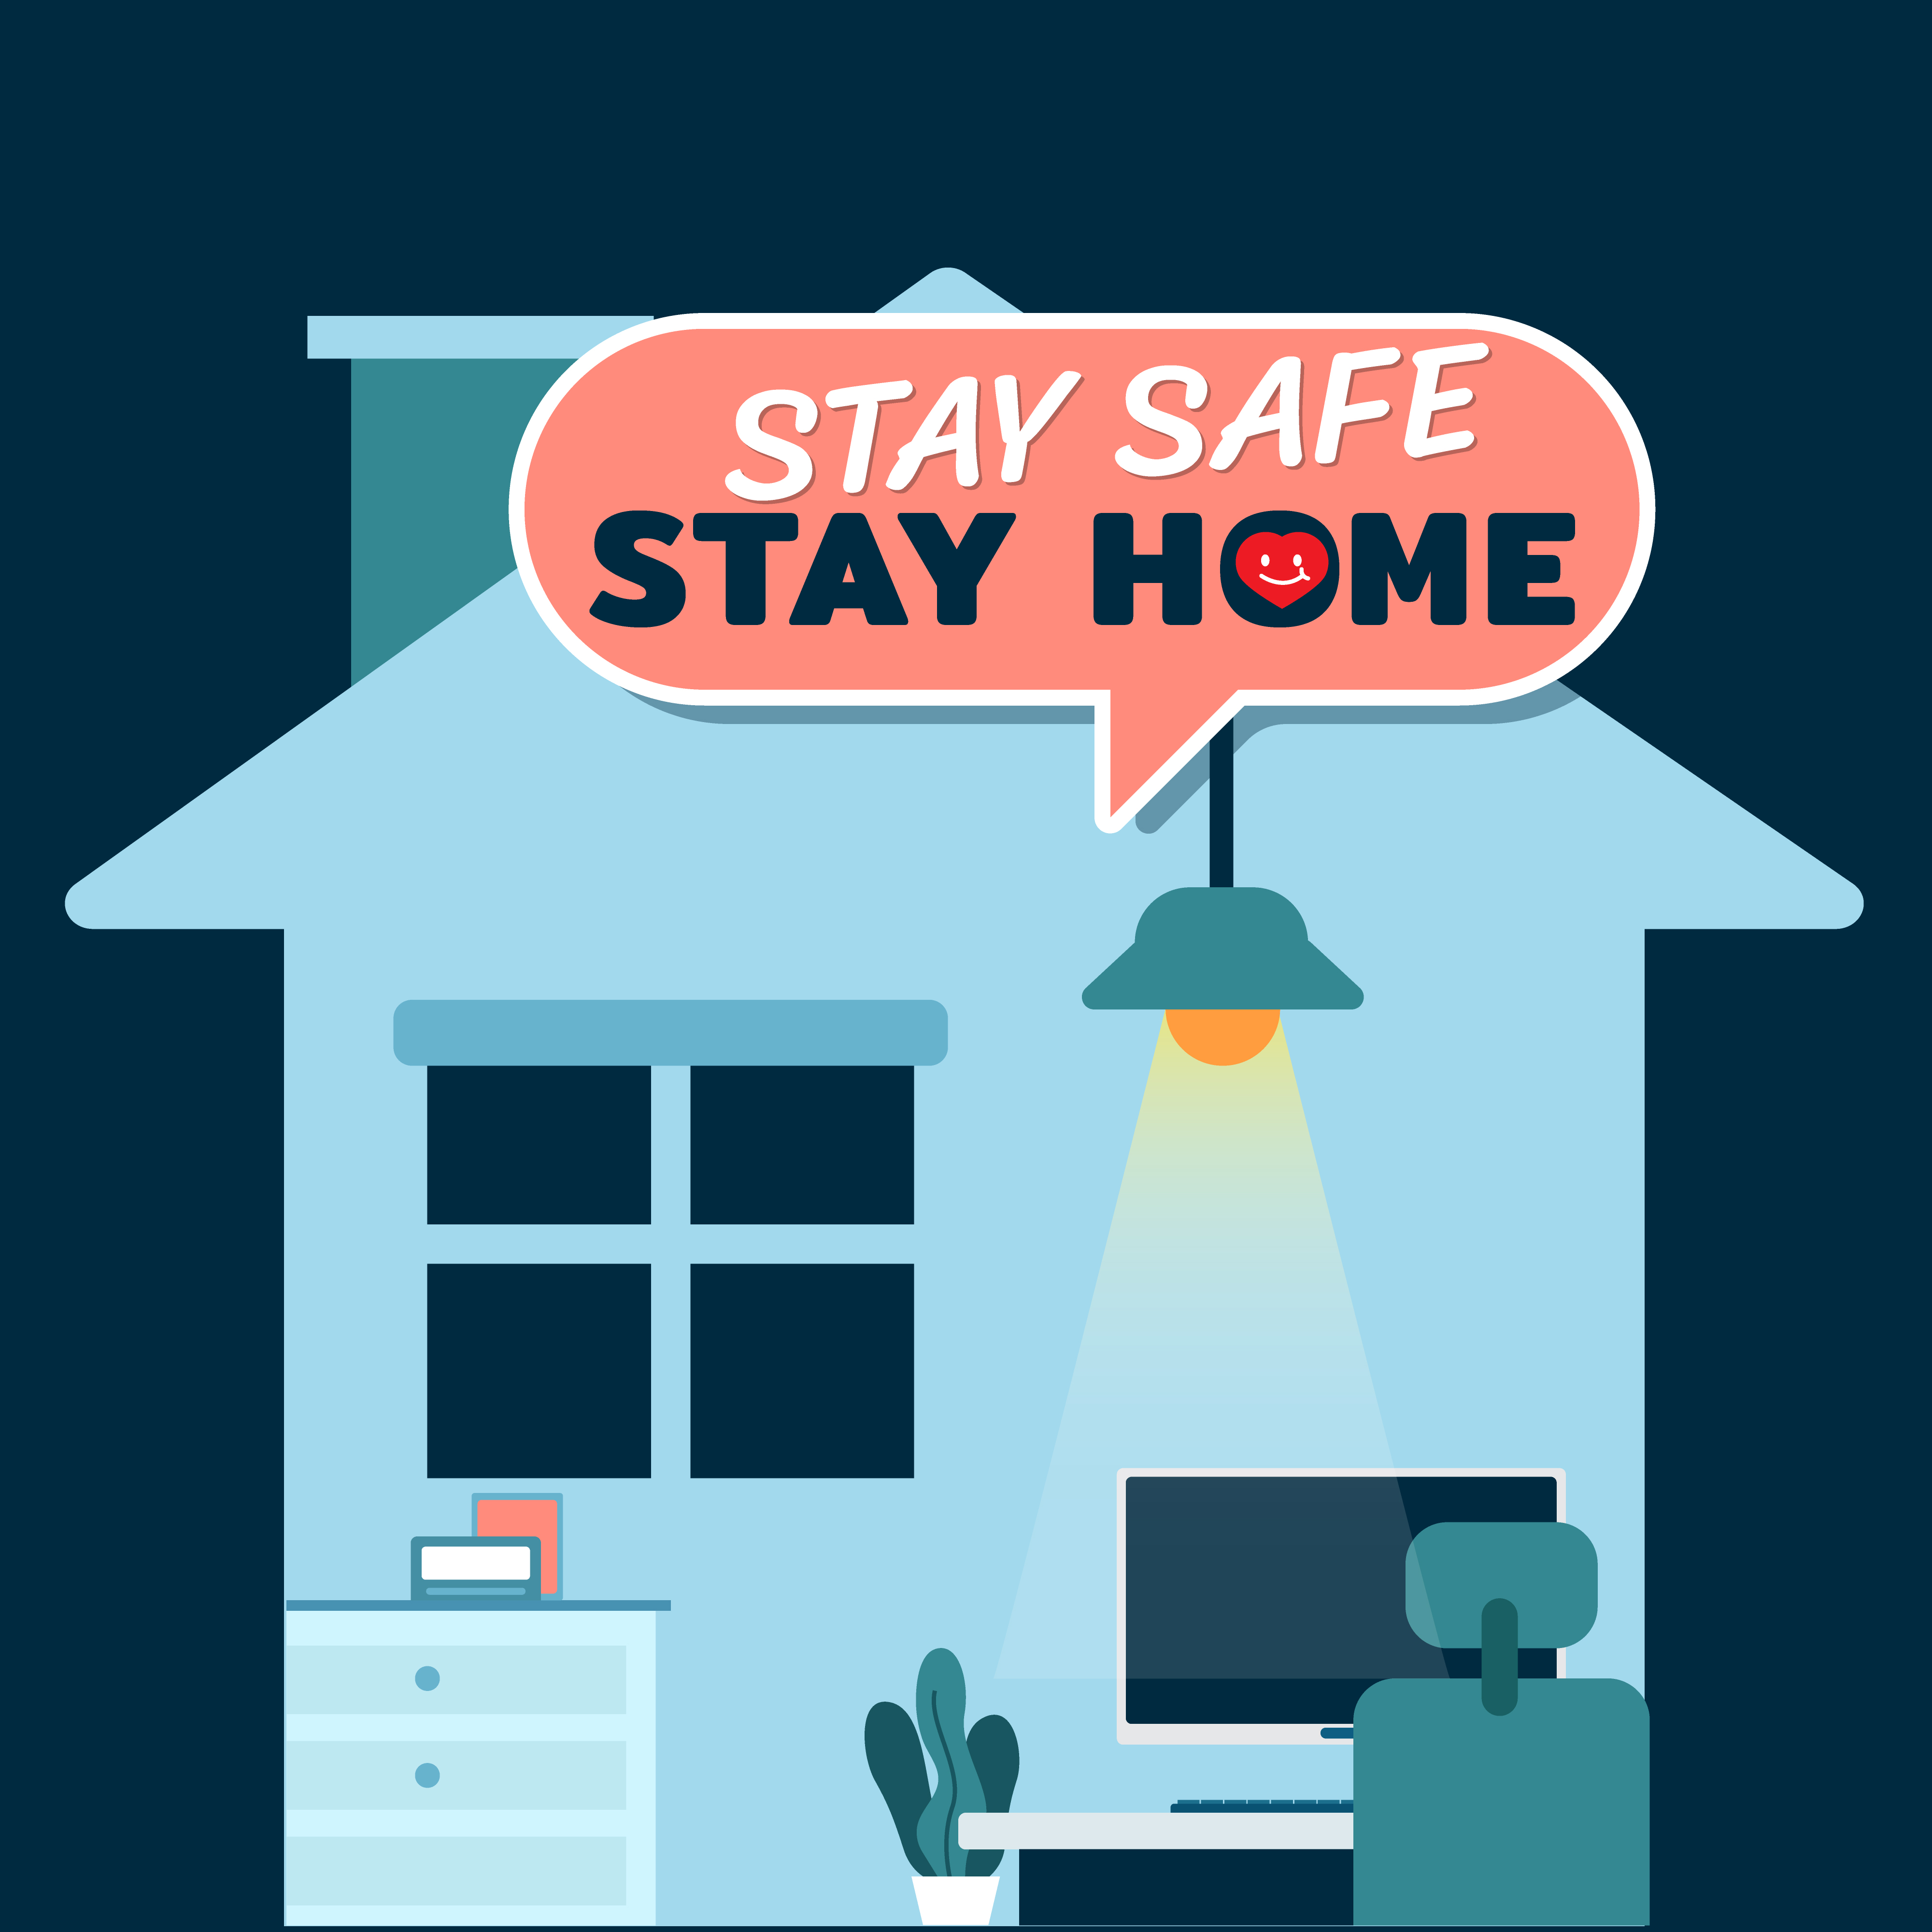 Life is safe. Stay Home be safe. Stay Home - stay safe. Stay safe картинка. Safe Life материал.